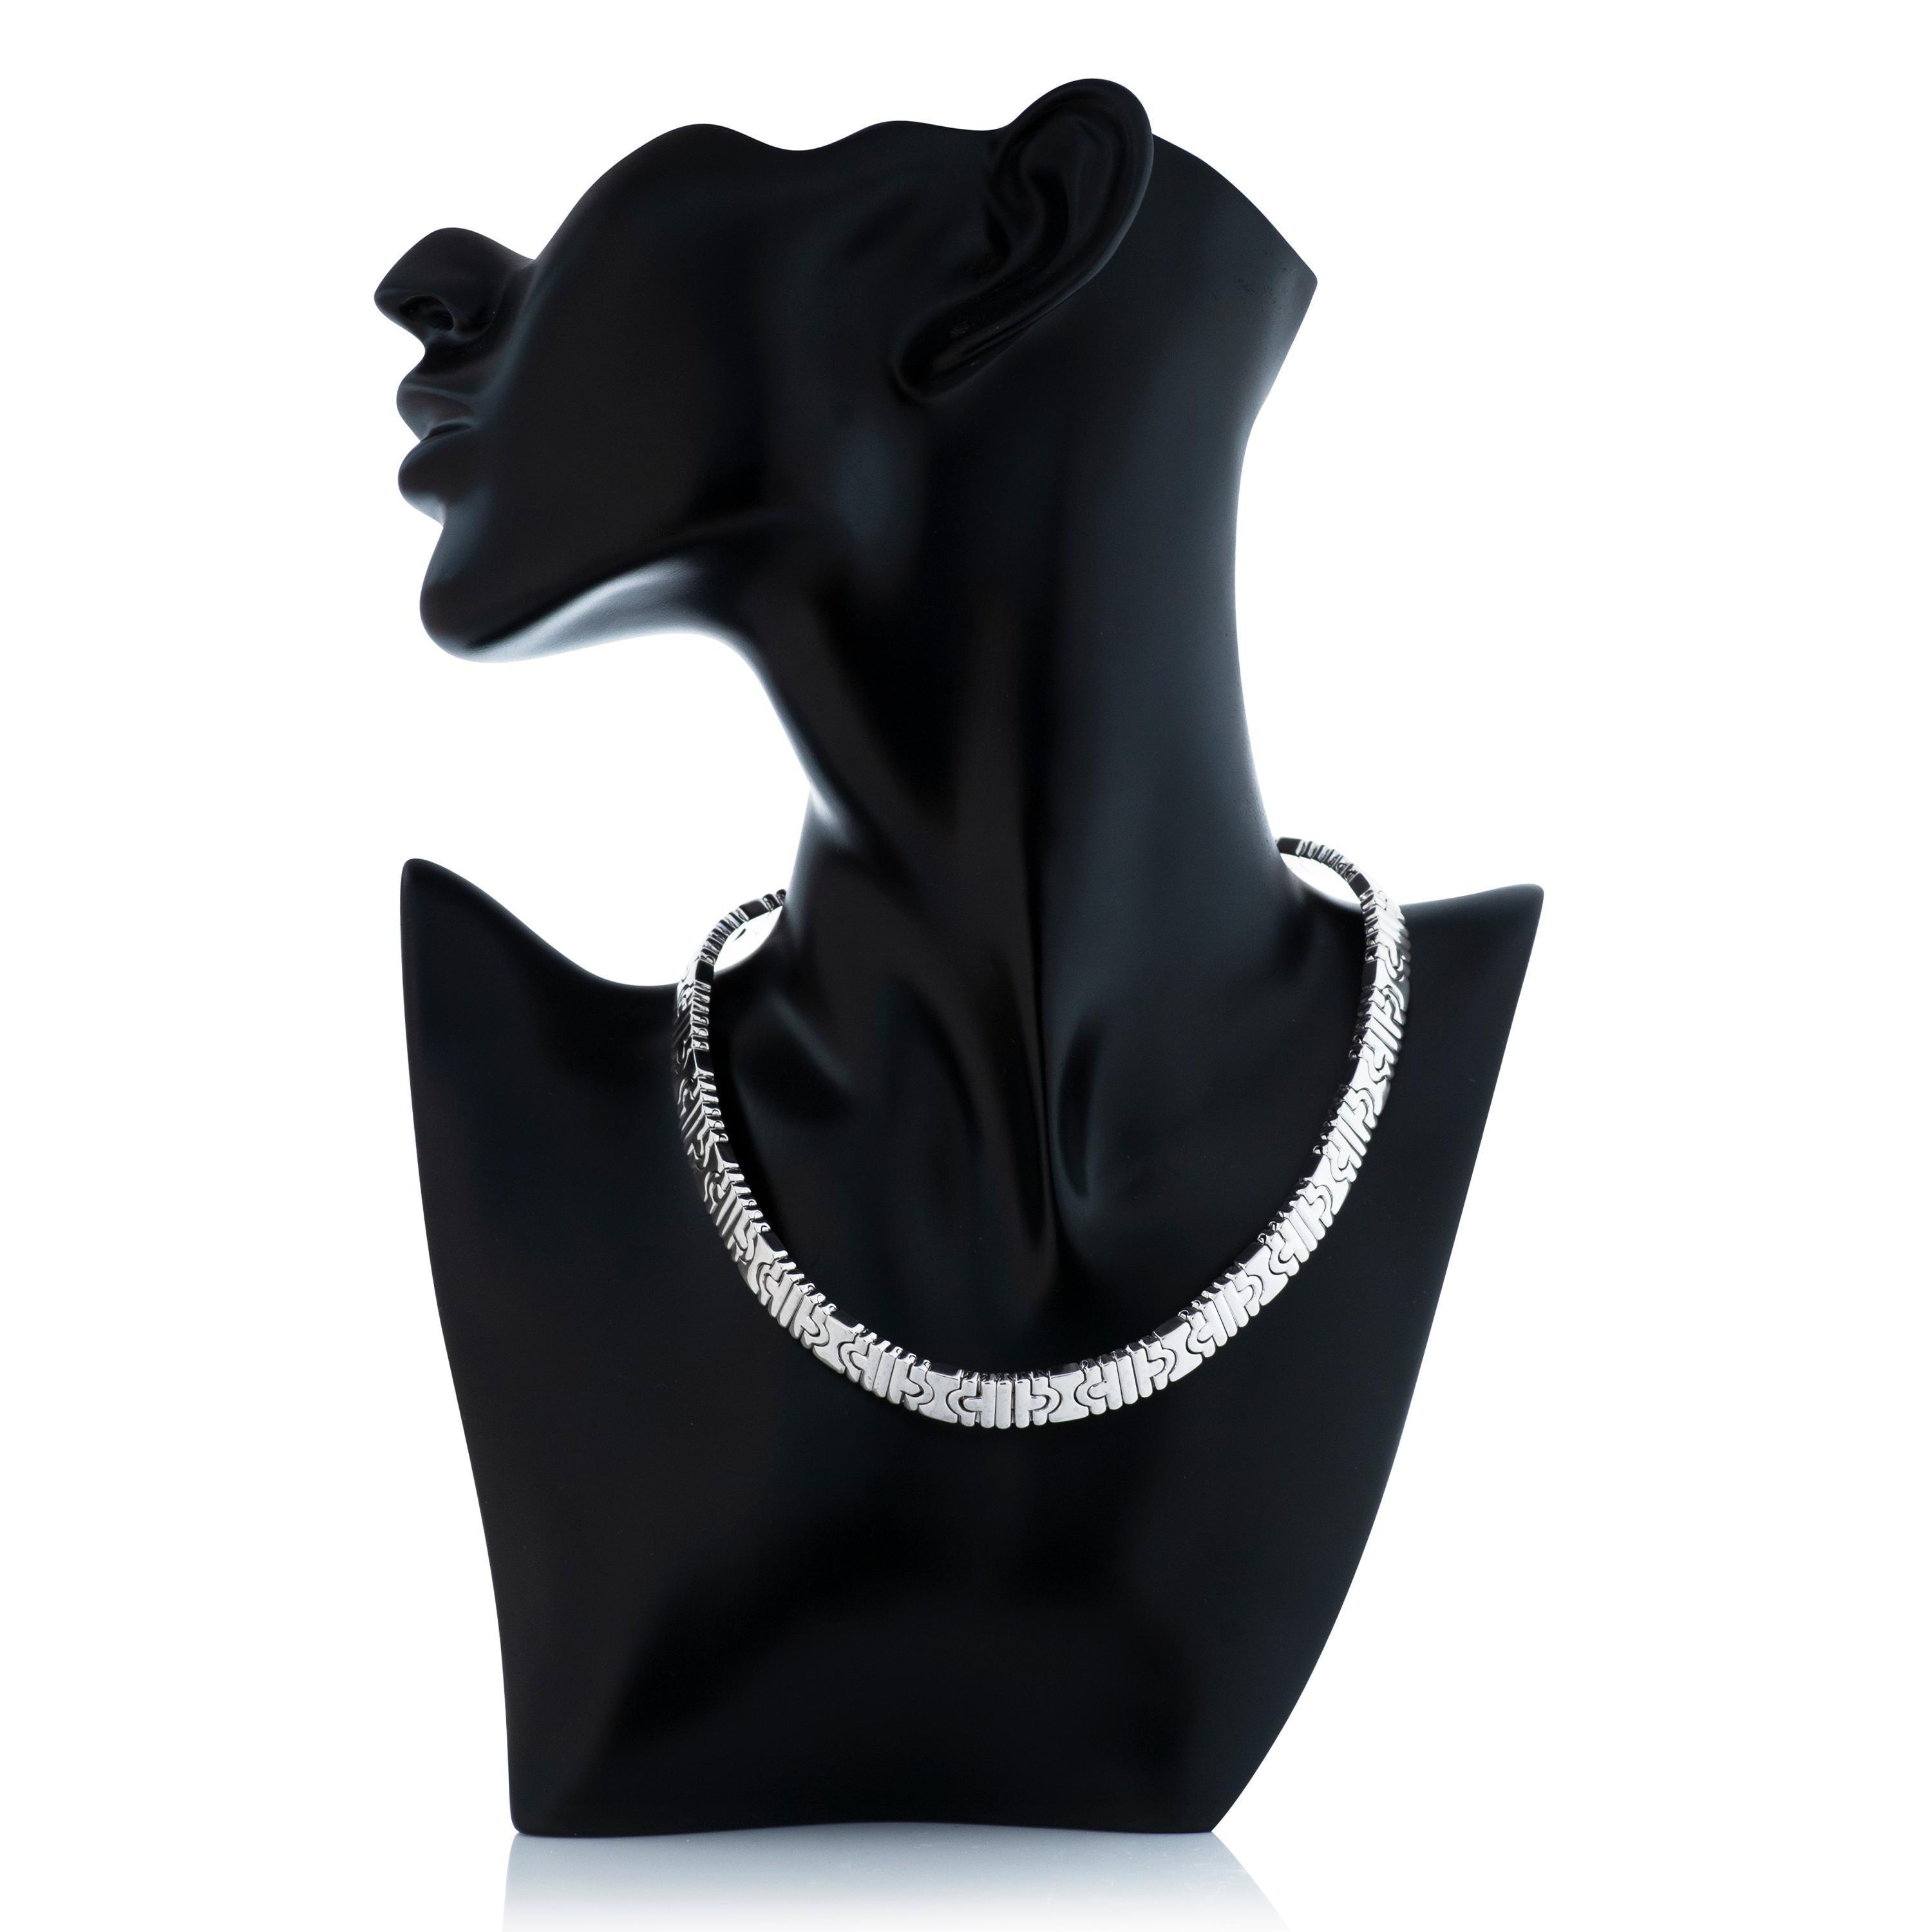 Bulgari Parentesi collection collar/choker necklace in 18k white gold.  

This necklace is 3/8